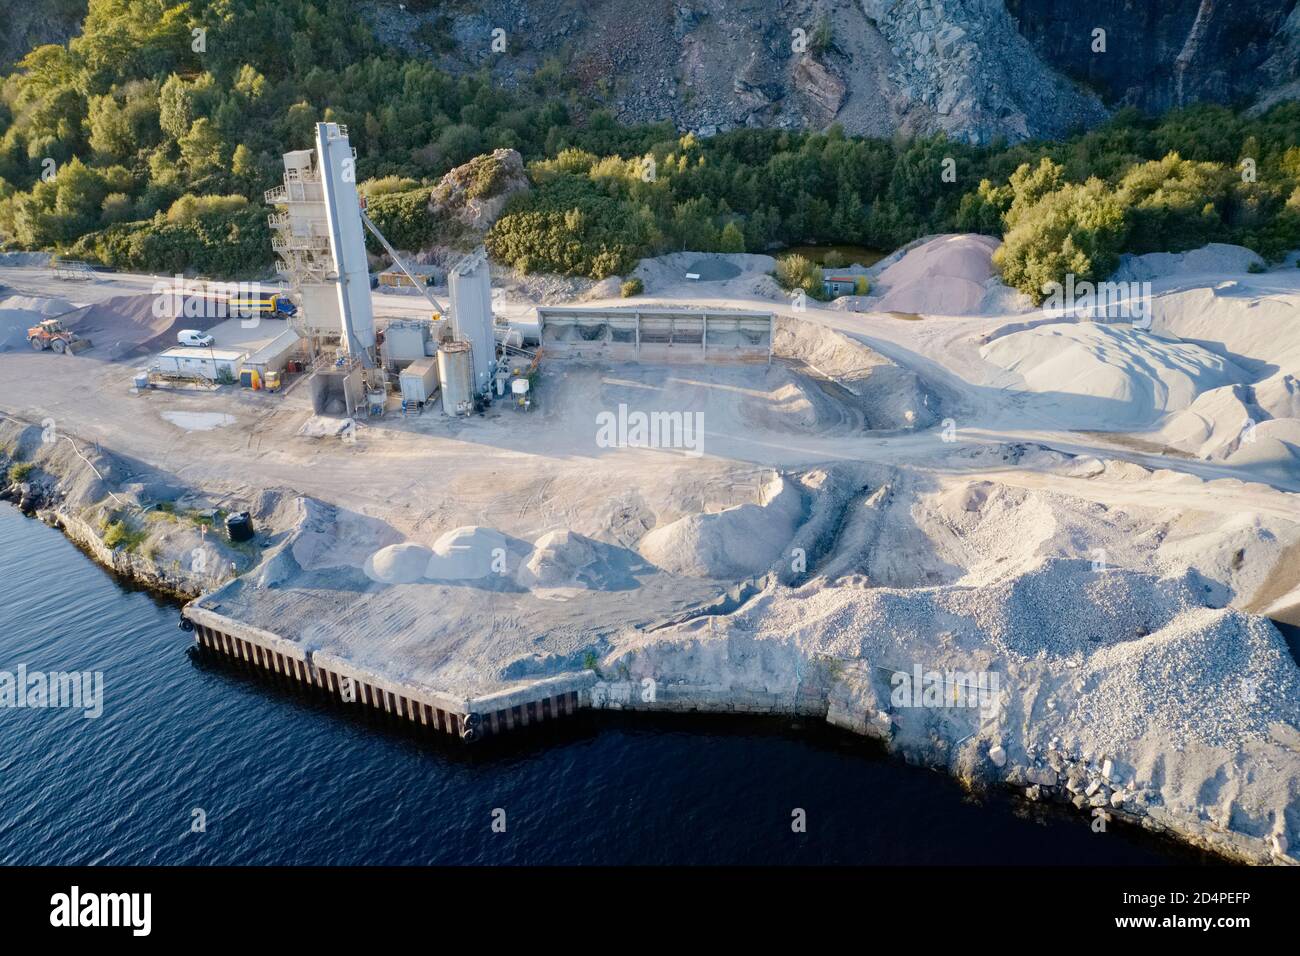 Quarry works industrial digging aerial view from above showing sand mound and hills Stock Photo